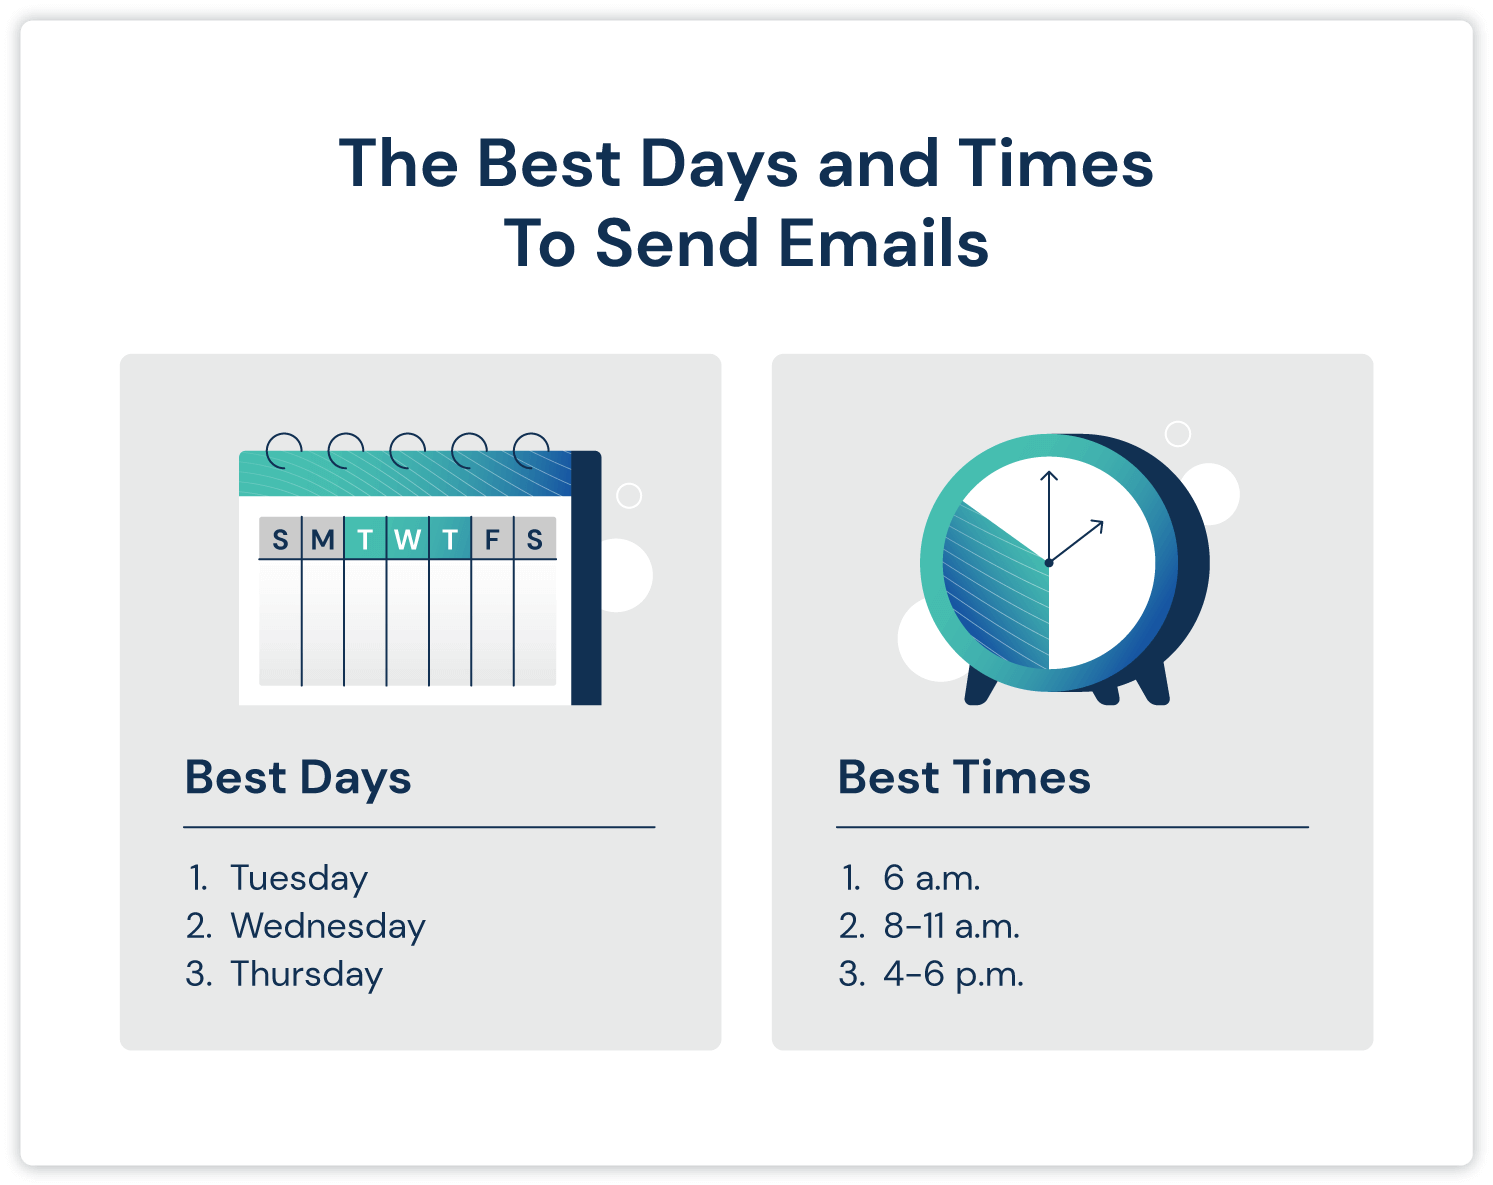 Consider the Recipient's Schedule to follow up email after meeting